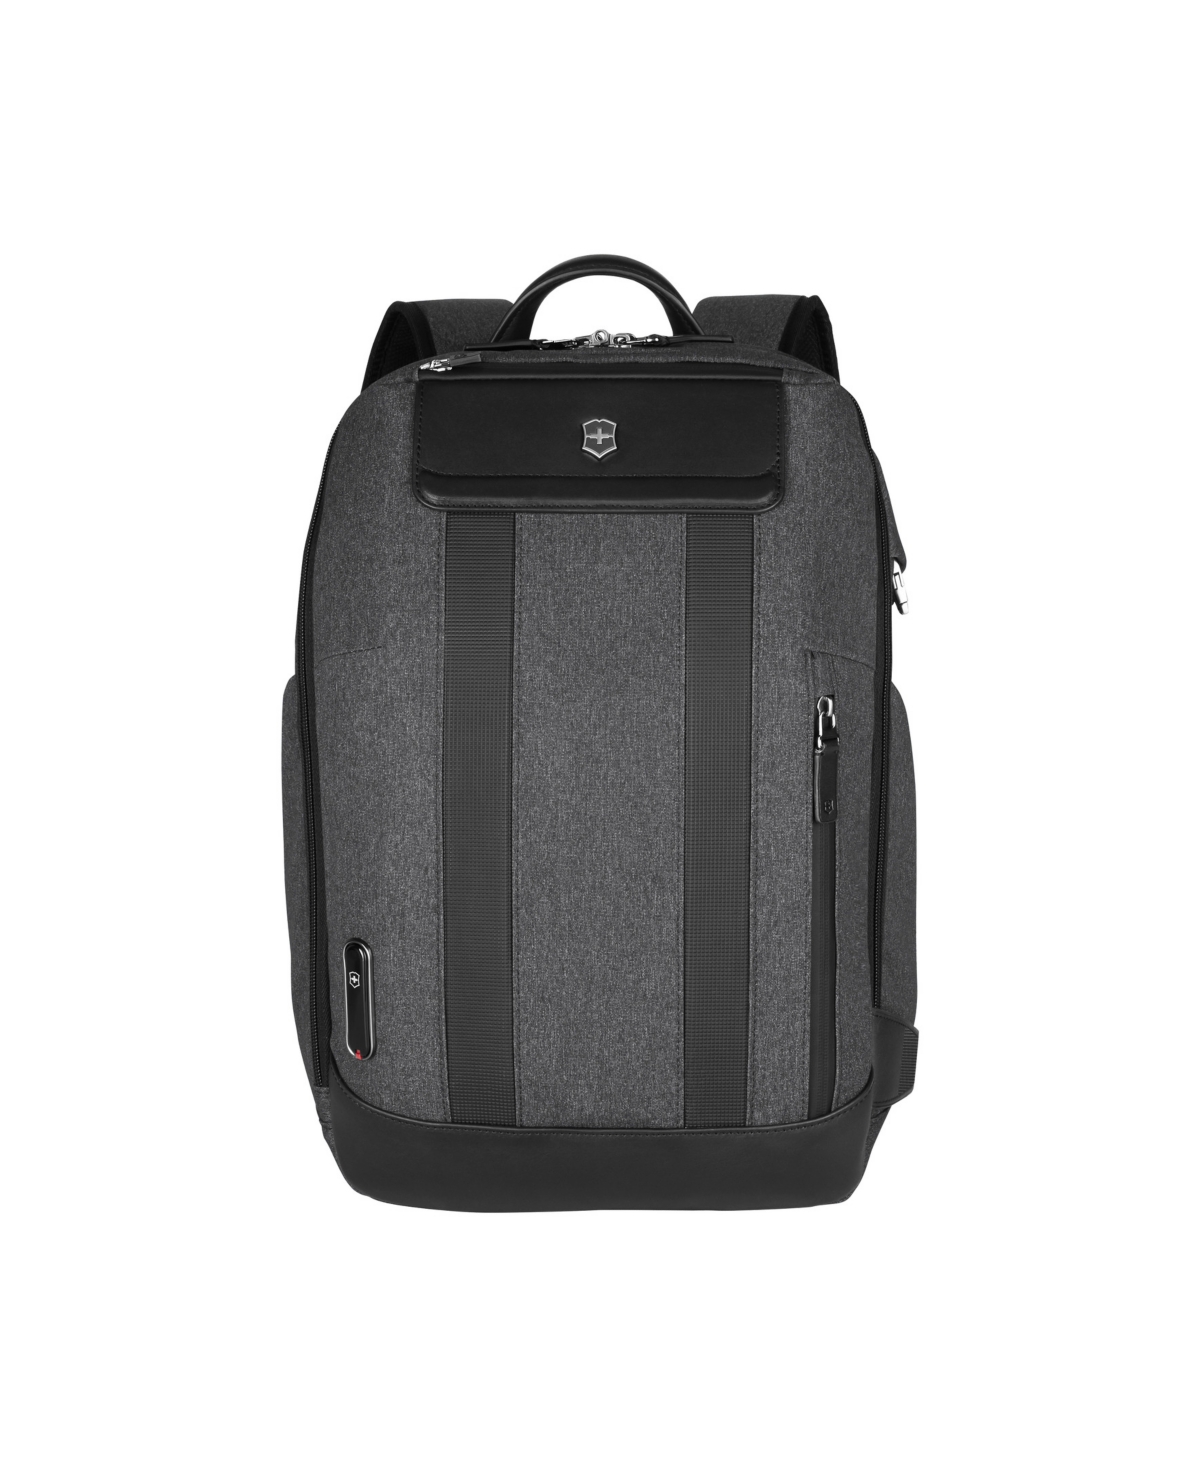 Architecture Urban 2 City Backpack - Gray